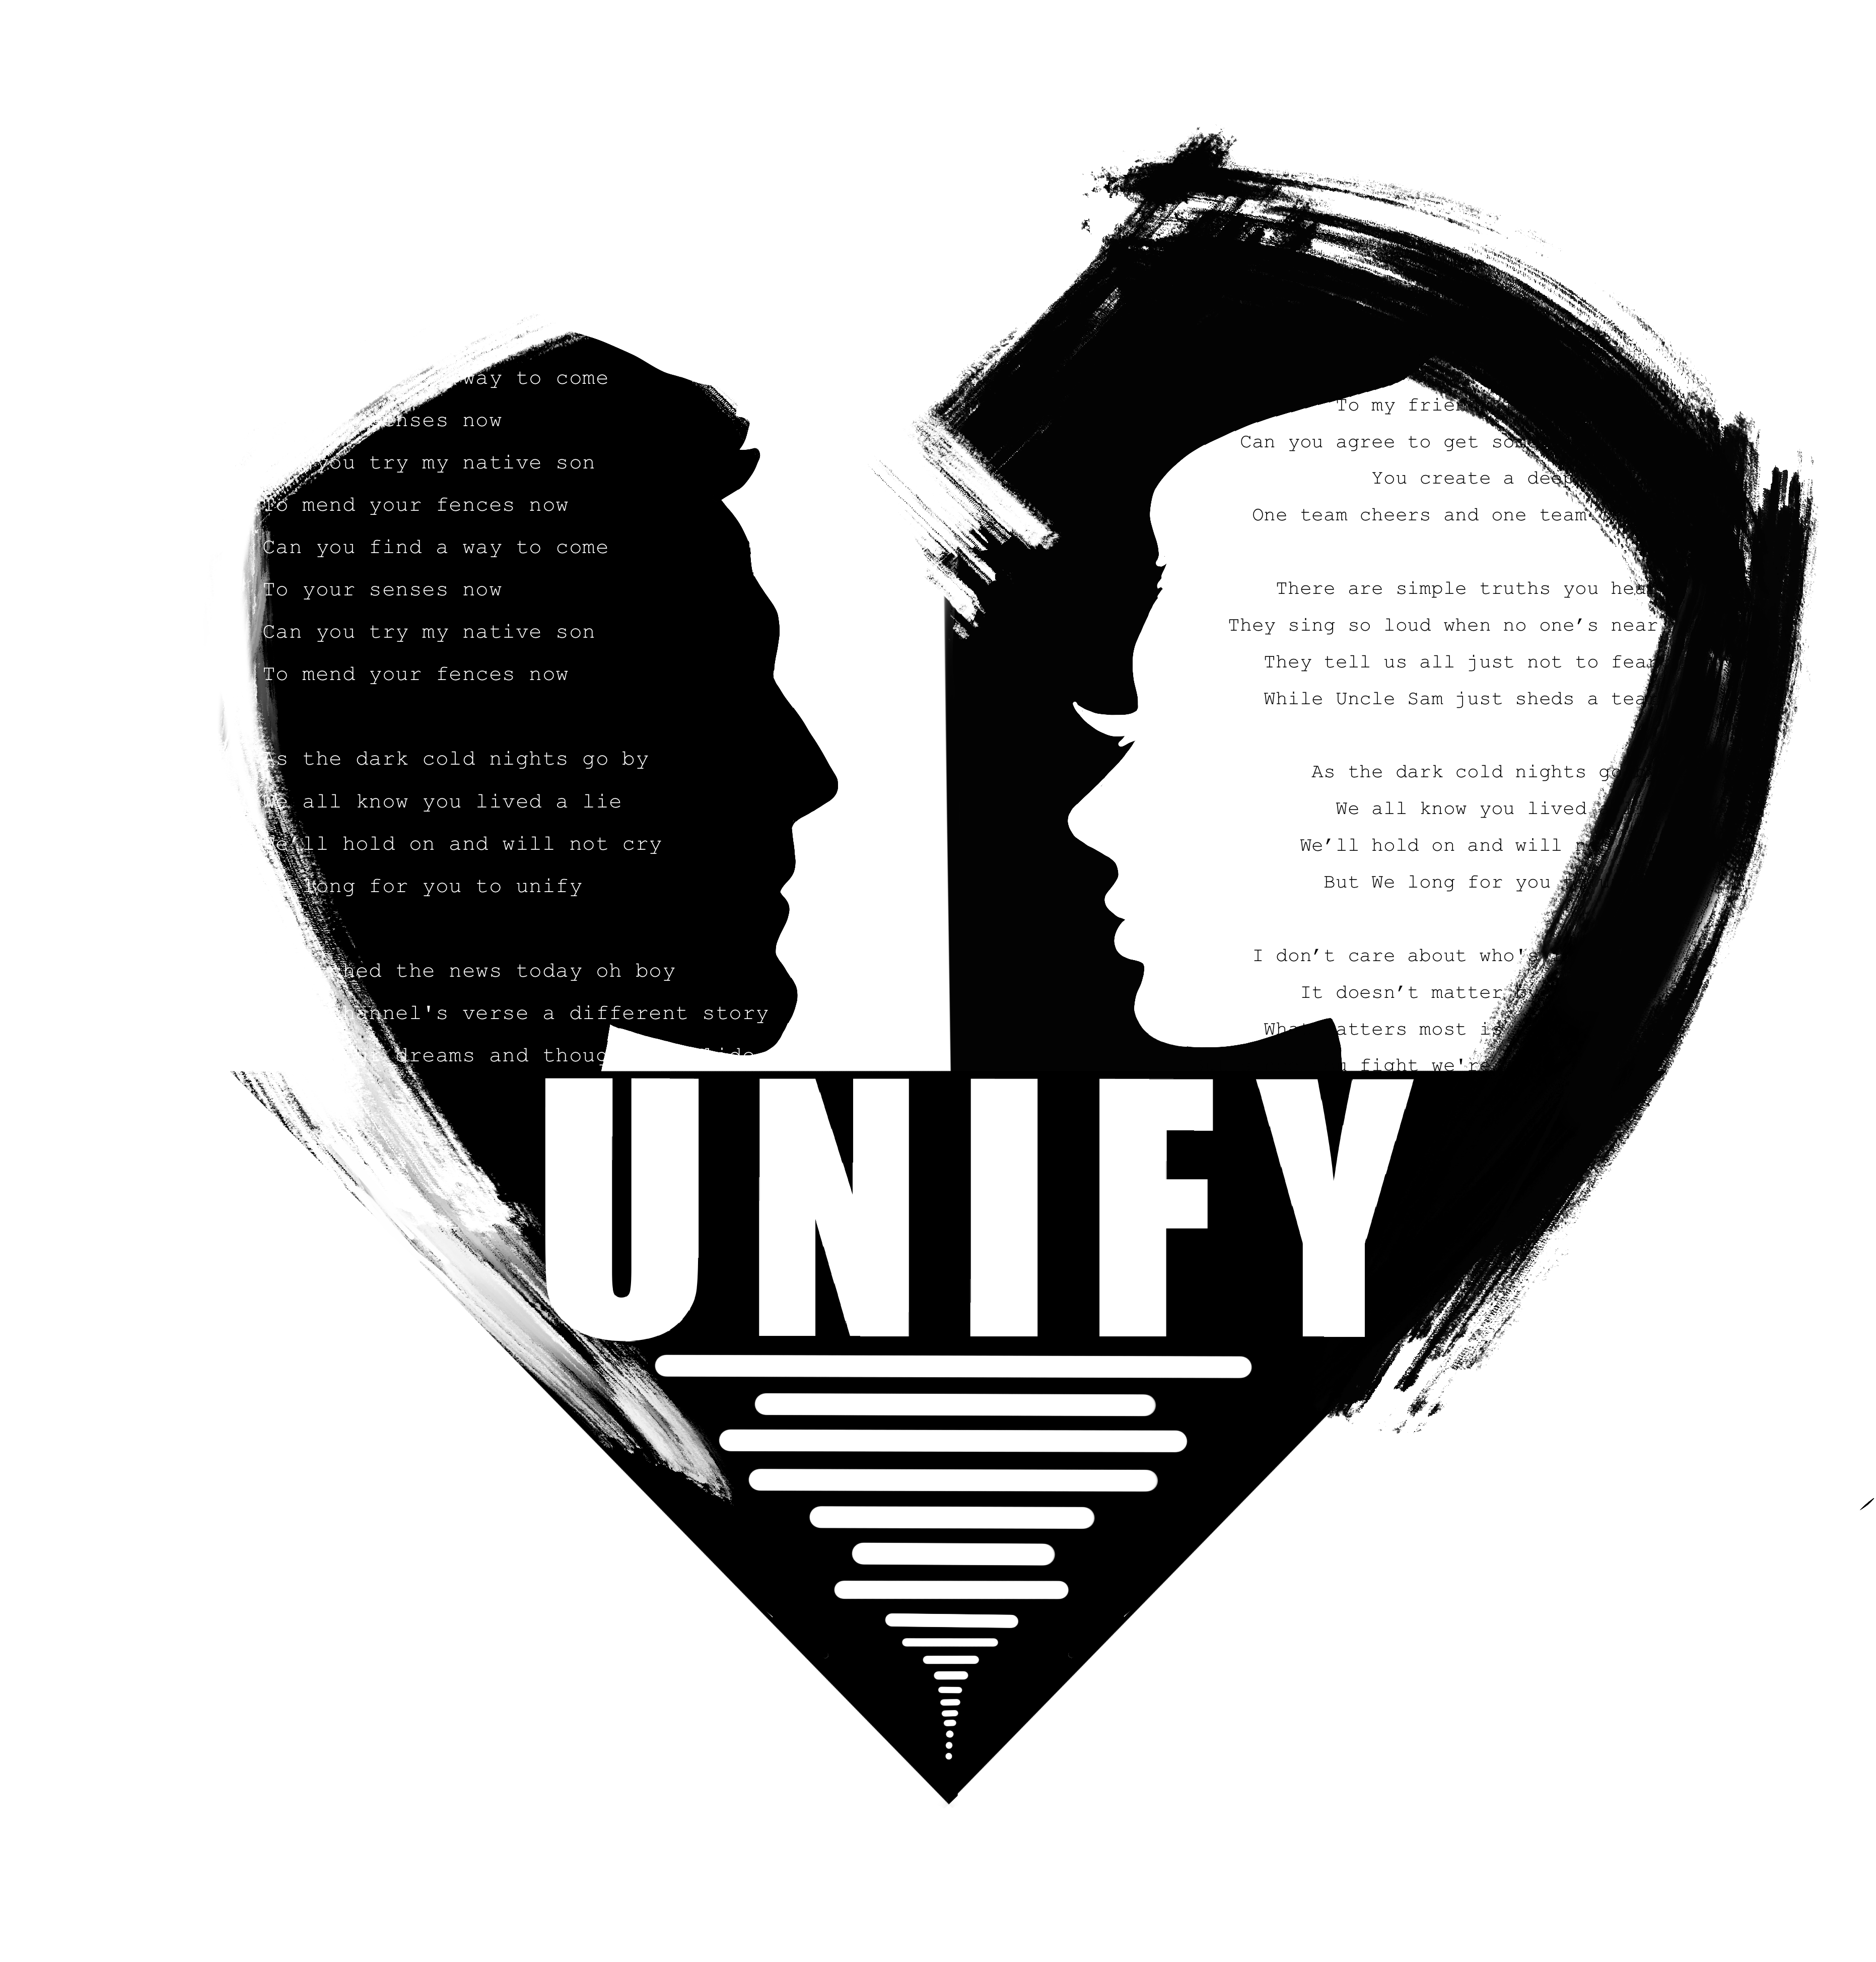 A Powerful and Moving Rock Anthem to Stir Hearts and Souls Towards Unity - Inspired By a Compelling Dream. John Kurfis Presents New Single "Unify"